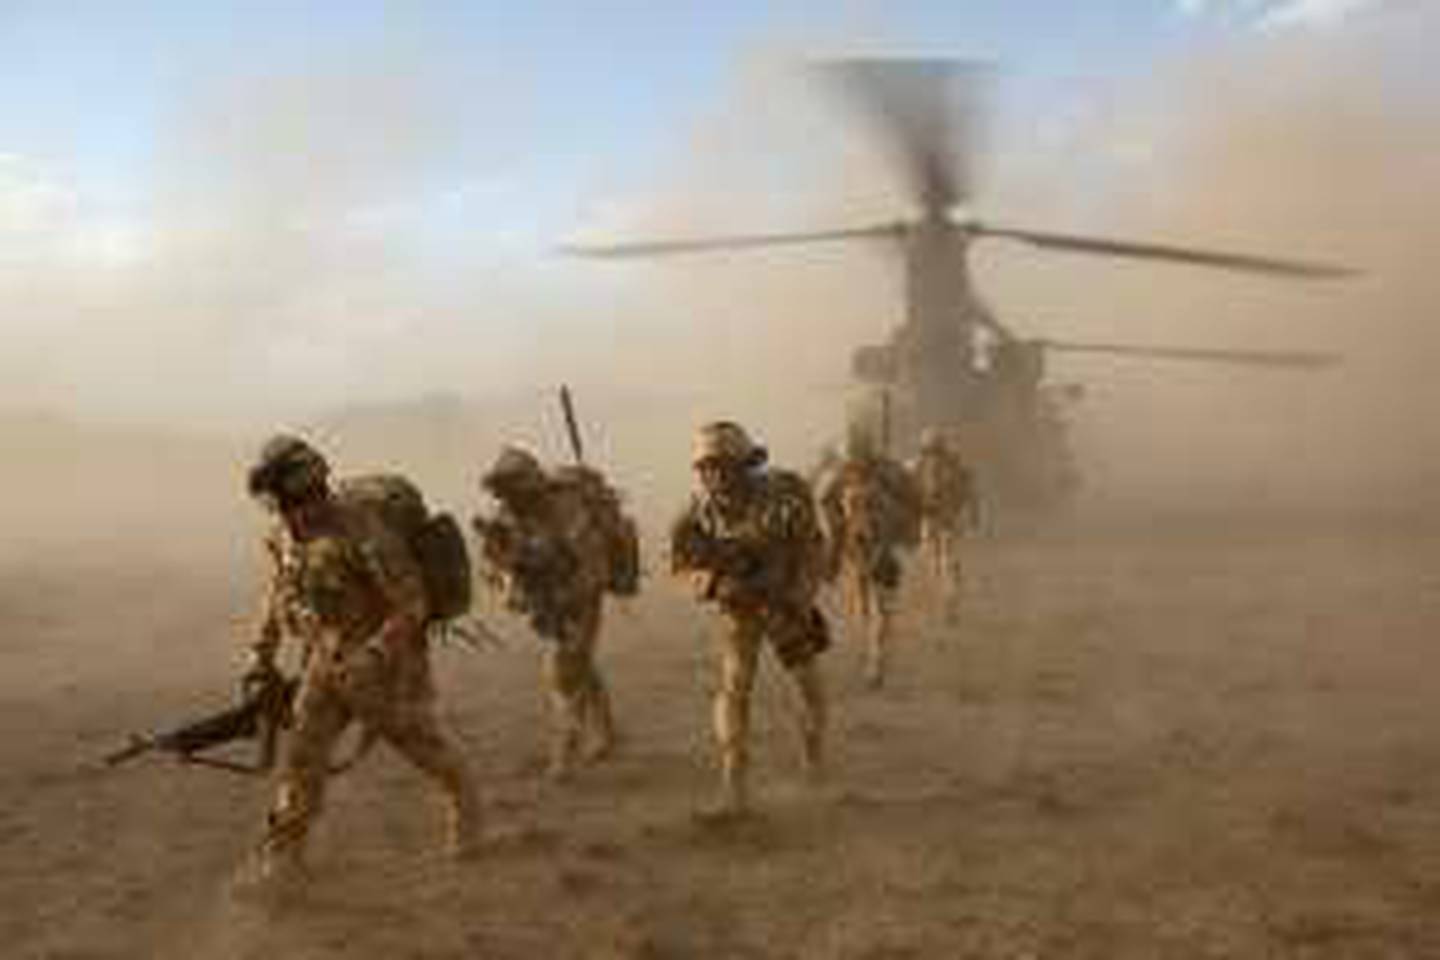 In this image made available by the Ministry of Defence in London, Monday June 8, 2009, British soldiers of the The Black Watch, 3rd Battalion, The Royal Regiment of Scotland, deploy from a Chinook helicopter in the desert of Afghanistan's Upper Sangin Valley, Sunday May 31, 2009, at the start of a joint operation with the Afghan National Army, to search compounds and destroy drug caches and narcotic manufacturing facilities. The operation destroyed ten narcotic manufacturing facilities, and as well as the opium, it netted 220 kg of morphine, more than 100 kg of heroin and 148 kg of cannabis.(AP Photo/Corporal Rupert Frere, Ministry of Defence, ho)  **EDITORIAL USE ONLY**